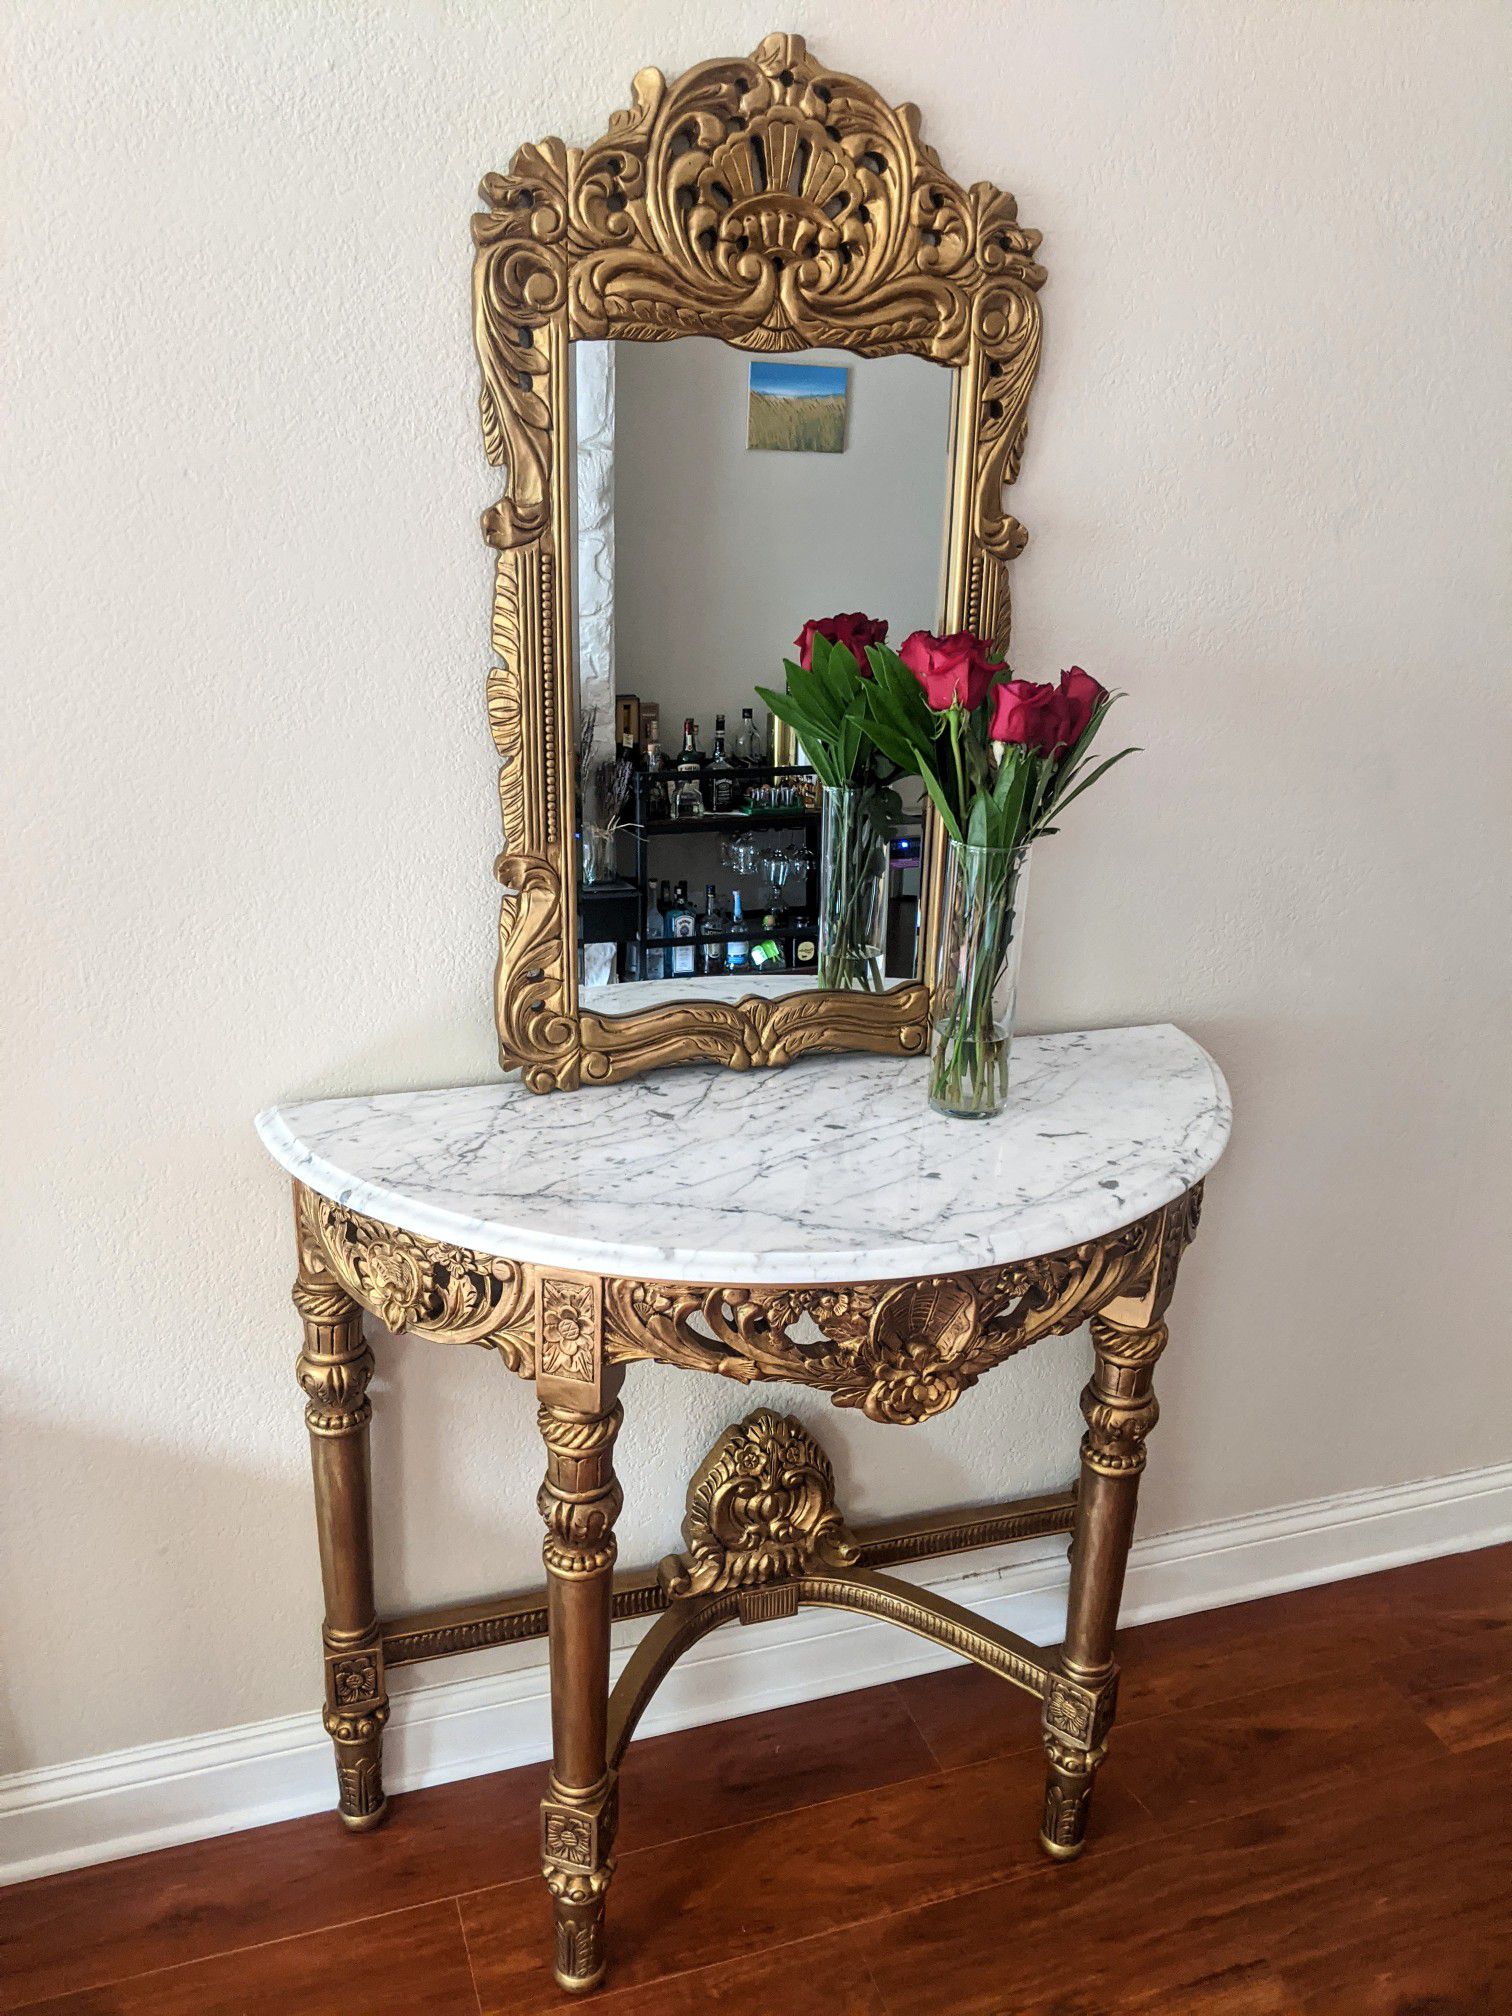 Antique roccoco carved wood gold console entrance foyer table with mirror and italian carrara marble top, vintage